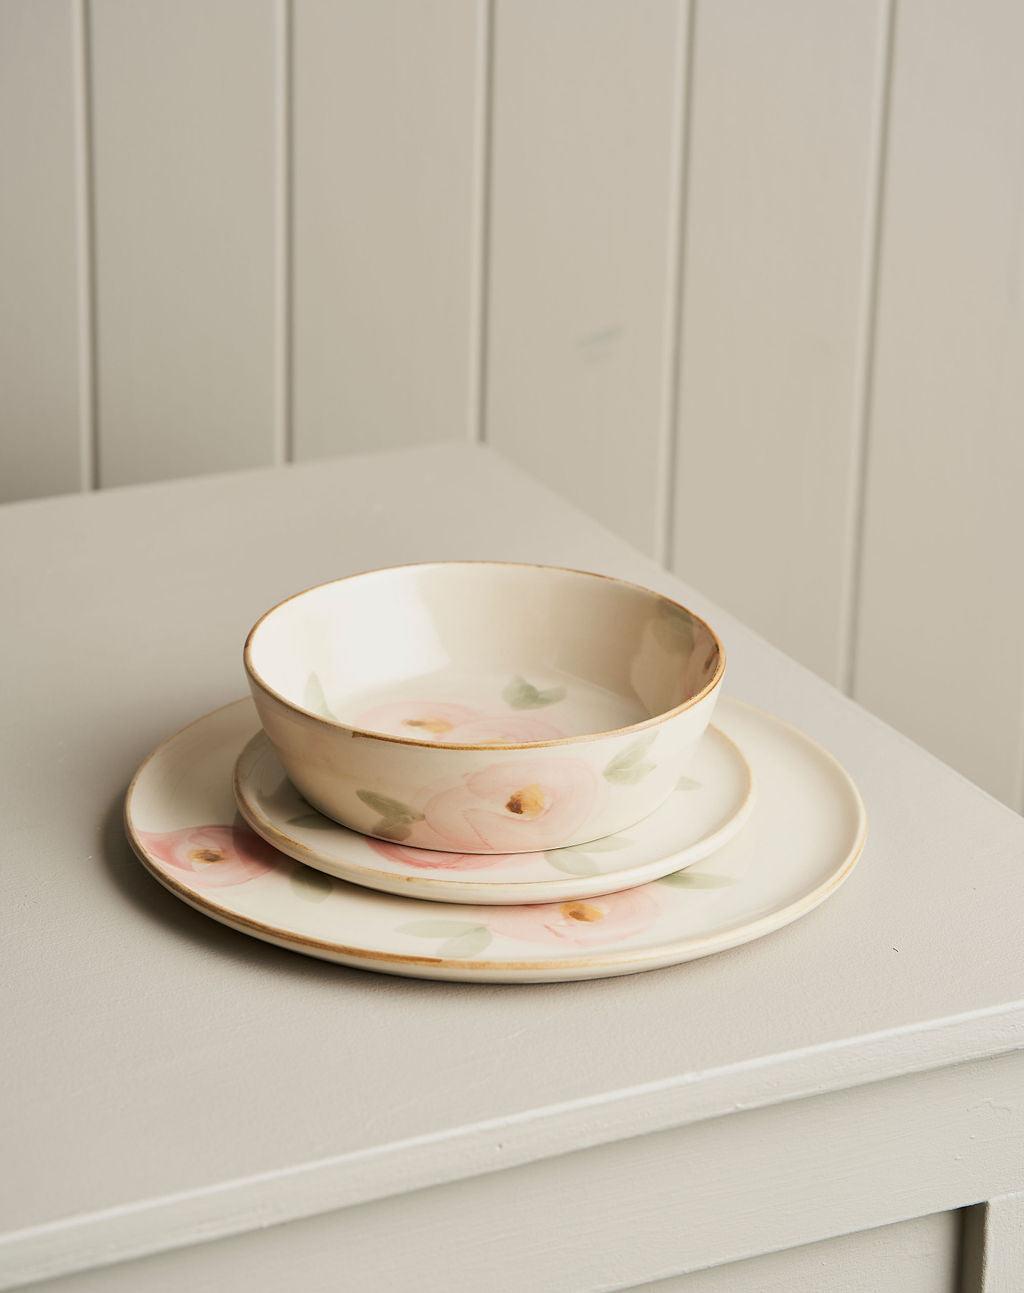 Canvas Side Plate / Orchard Blossom